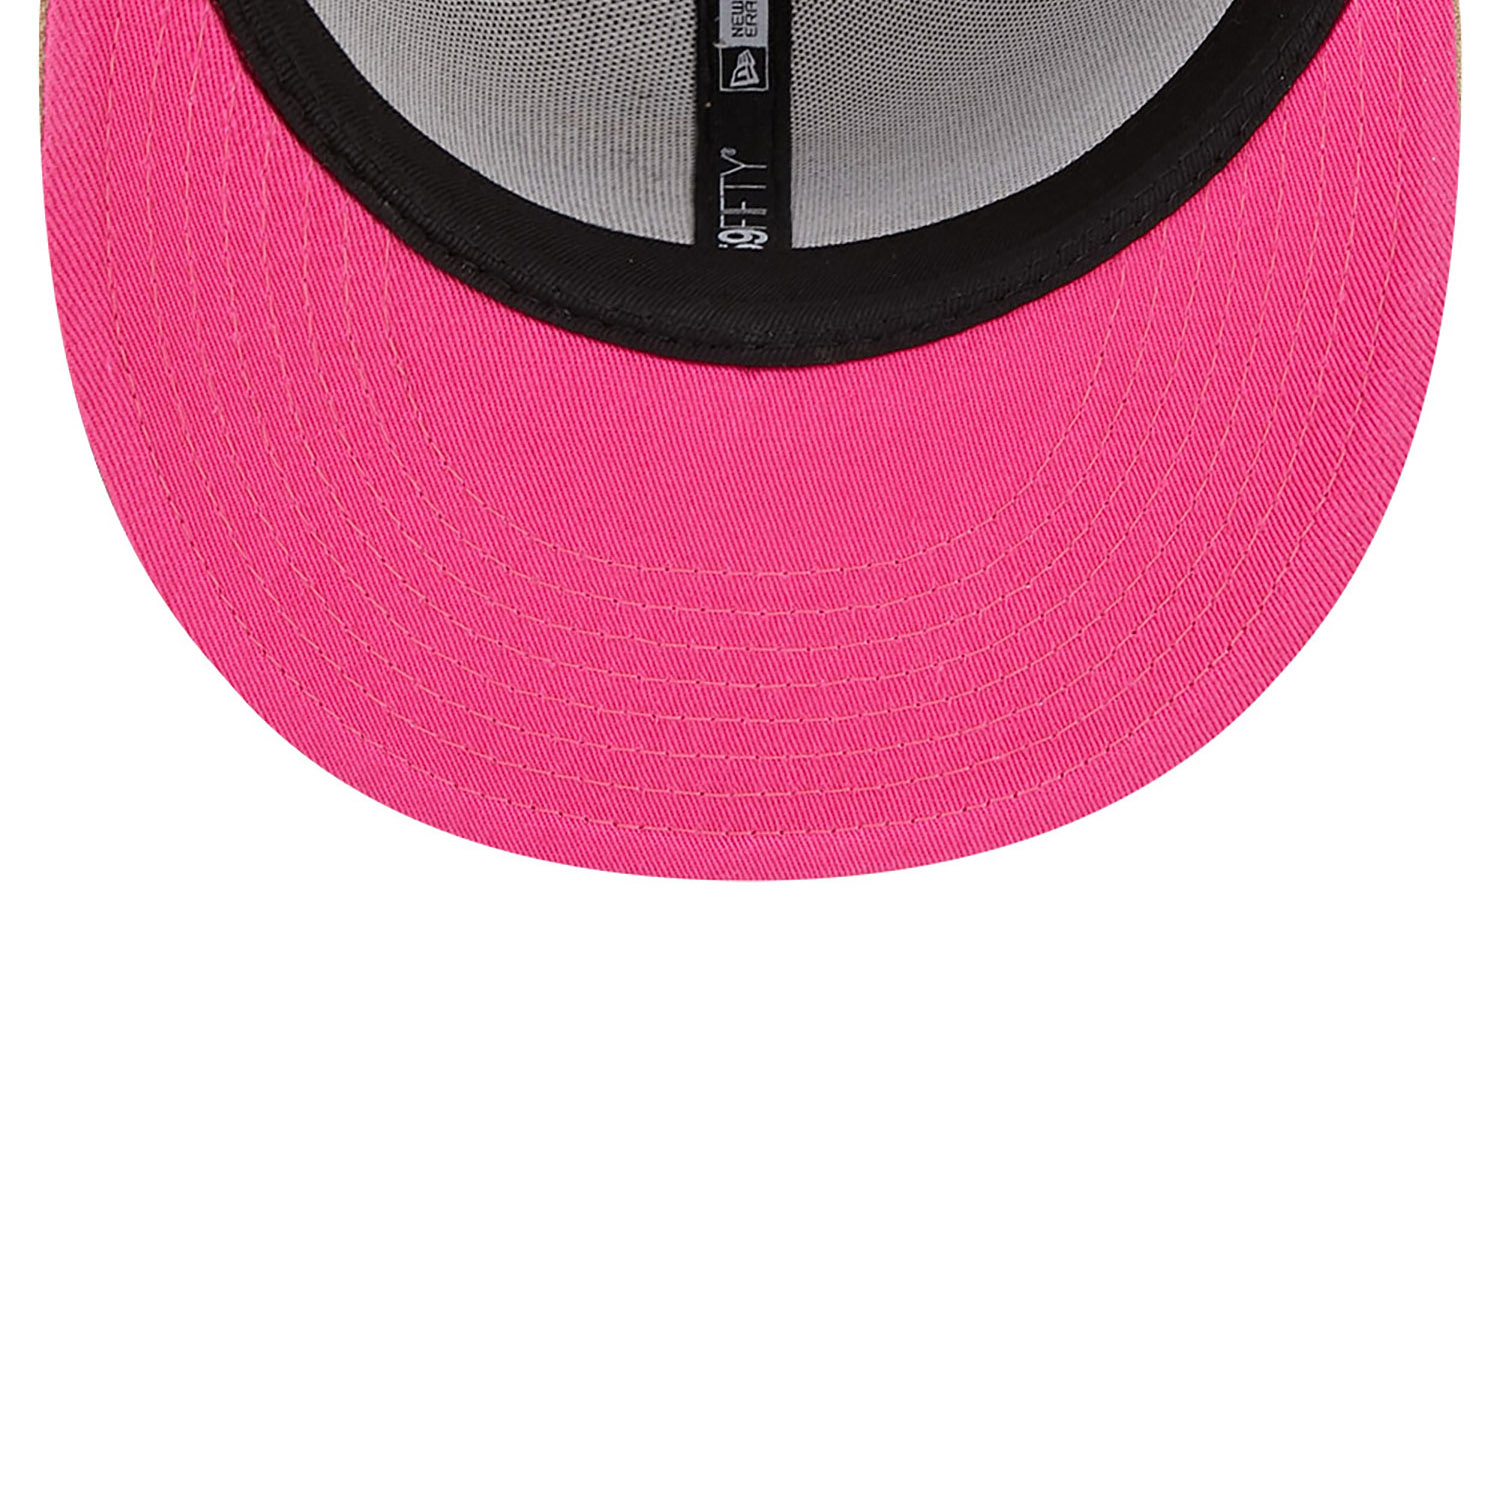 Casquette 59FIFTY Fitted Miami Heat Team Neon Beige